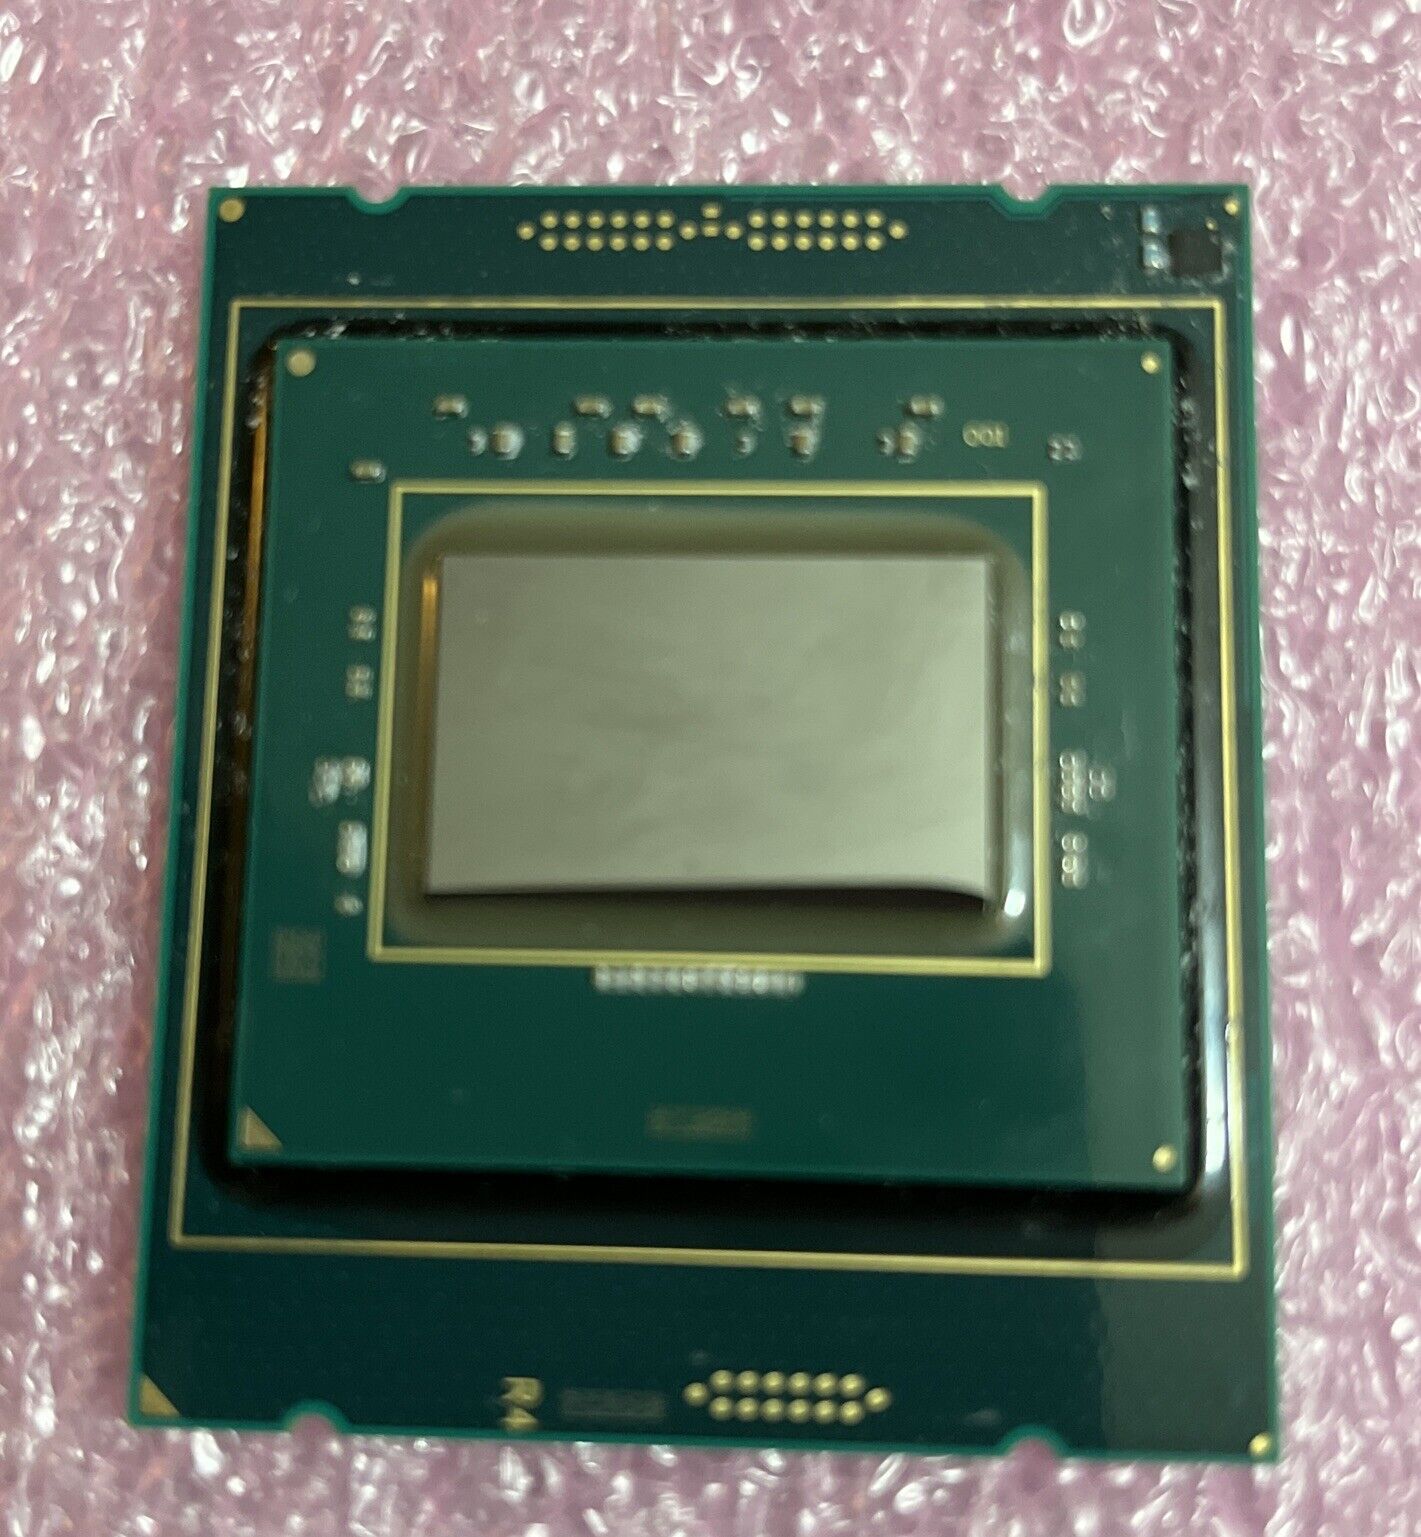 Delidded Intel Core i9-7900X 3.30GHz 10 Core 20 Thread CPU No Lid No Tested